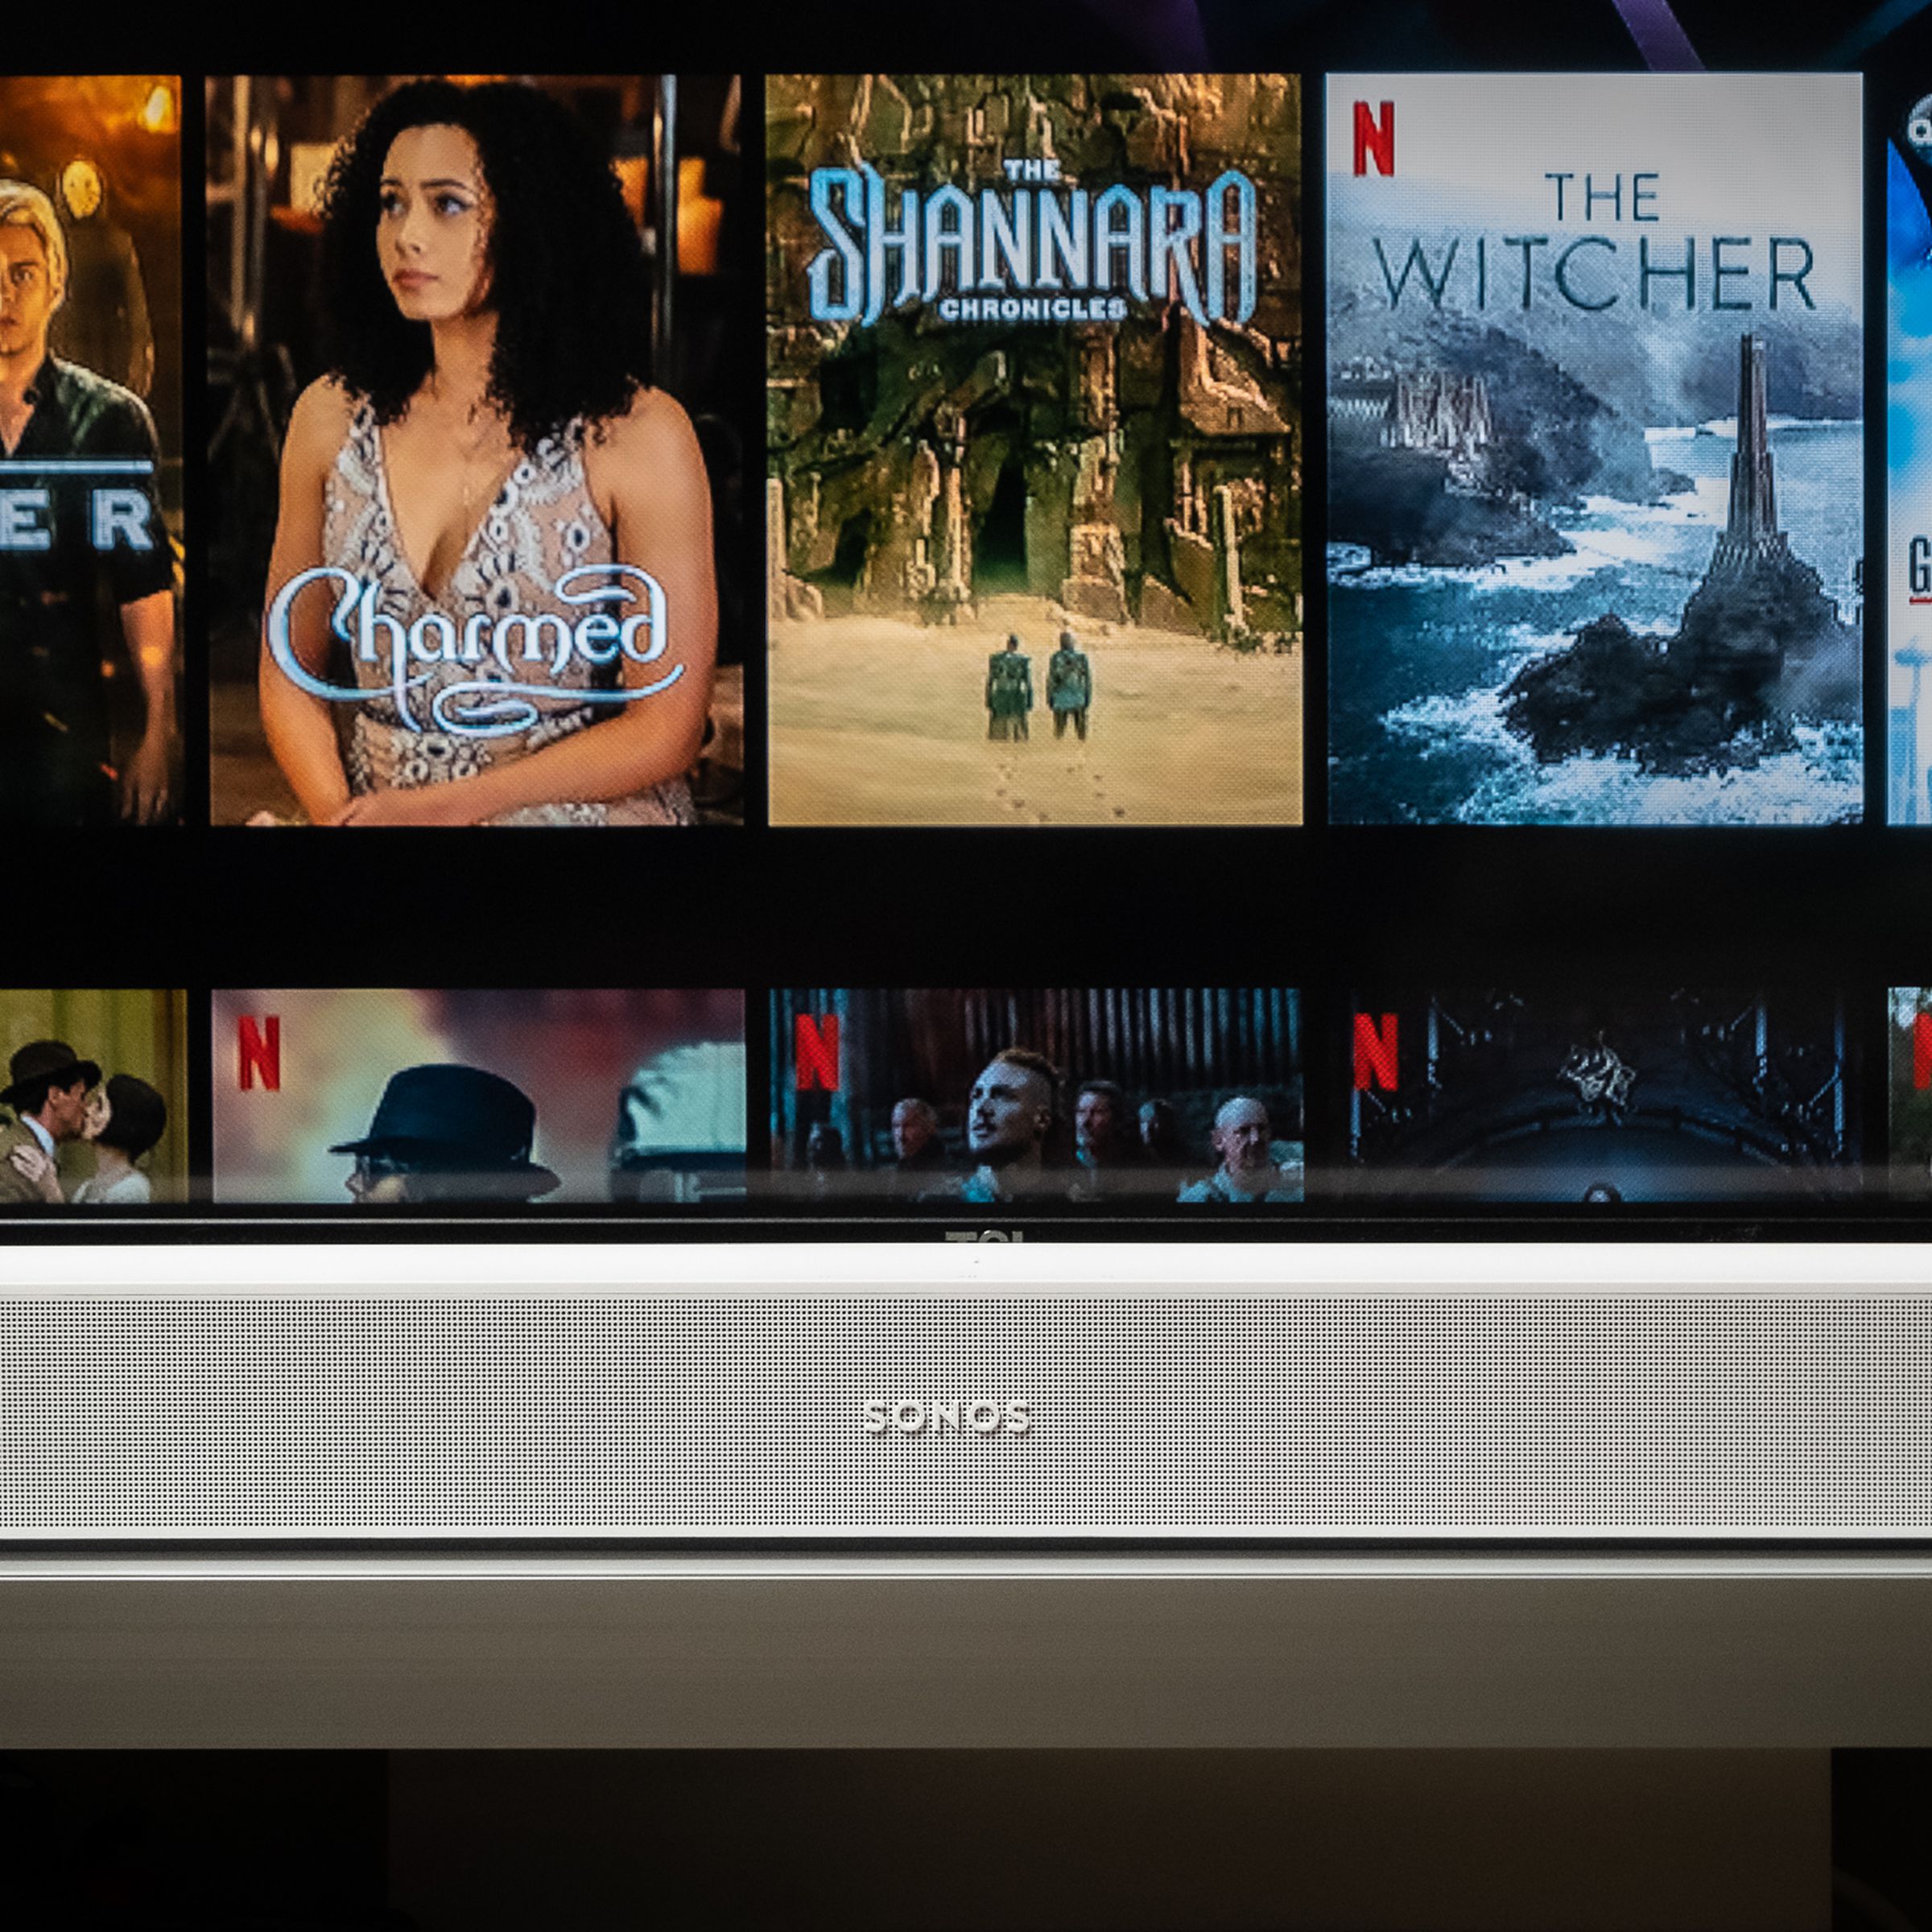 An image of the Sonos Beam soundbar with a TV screen in the background.